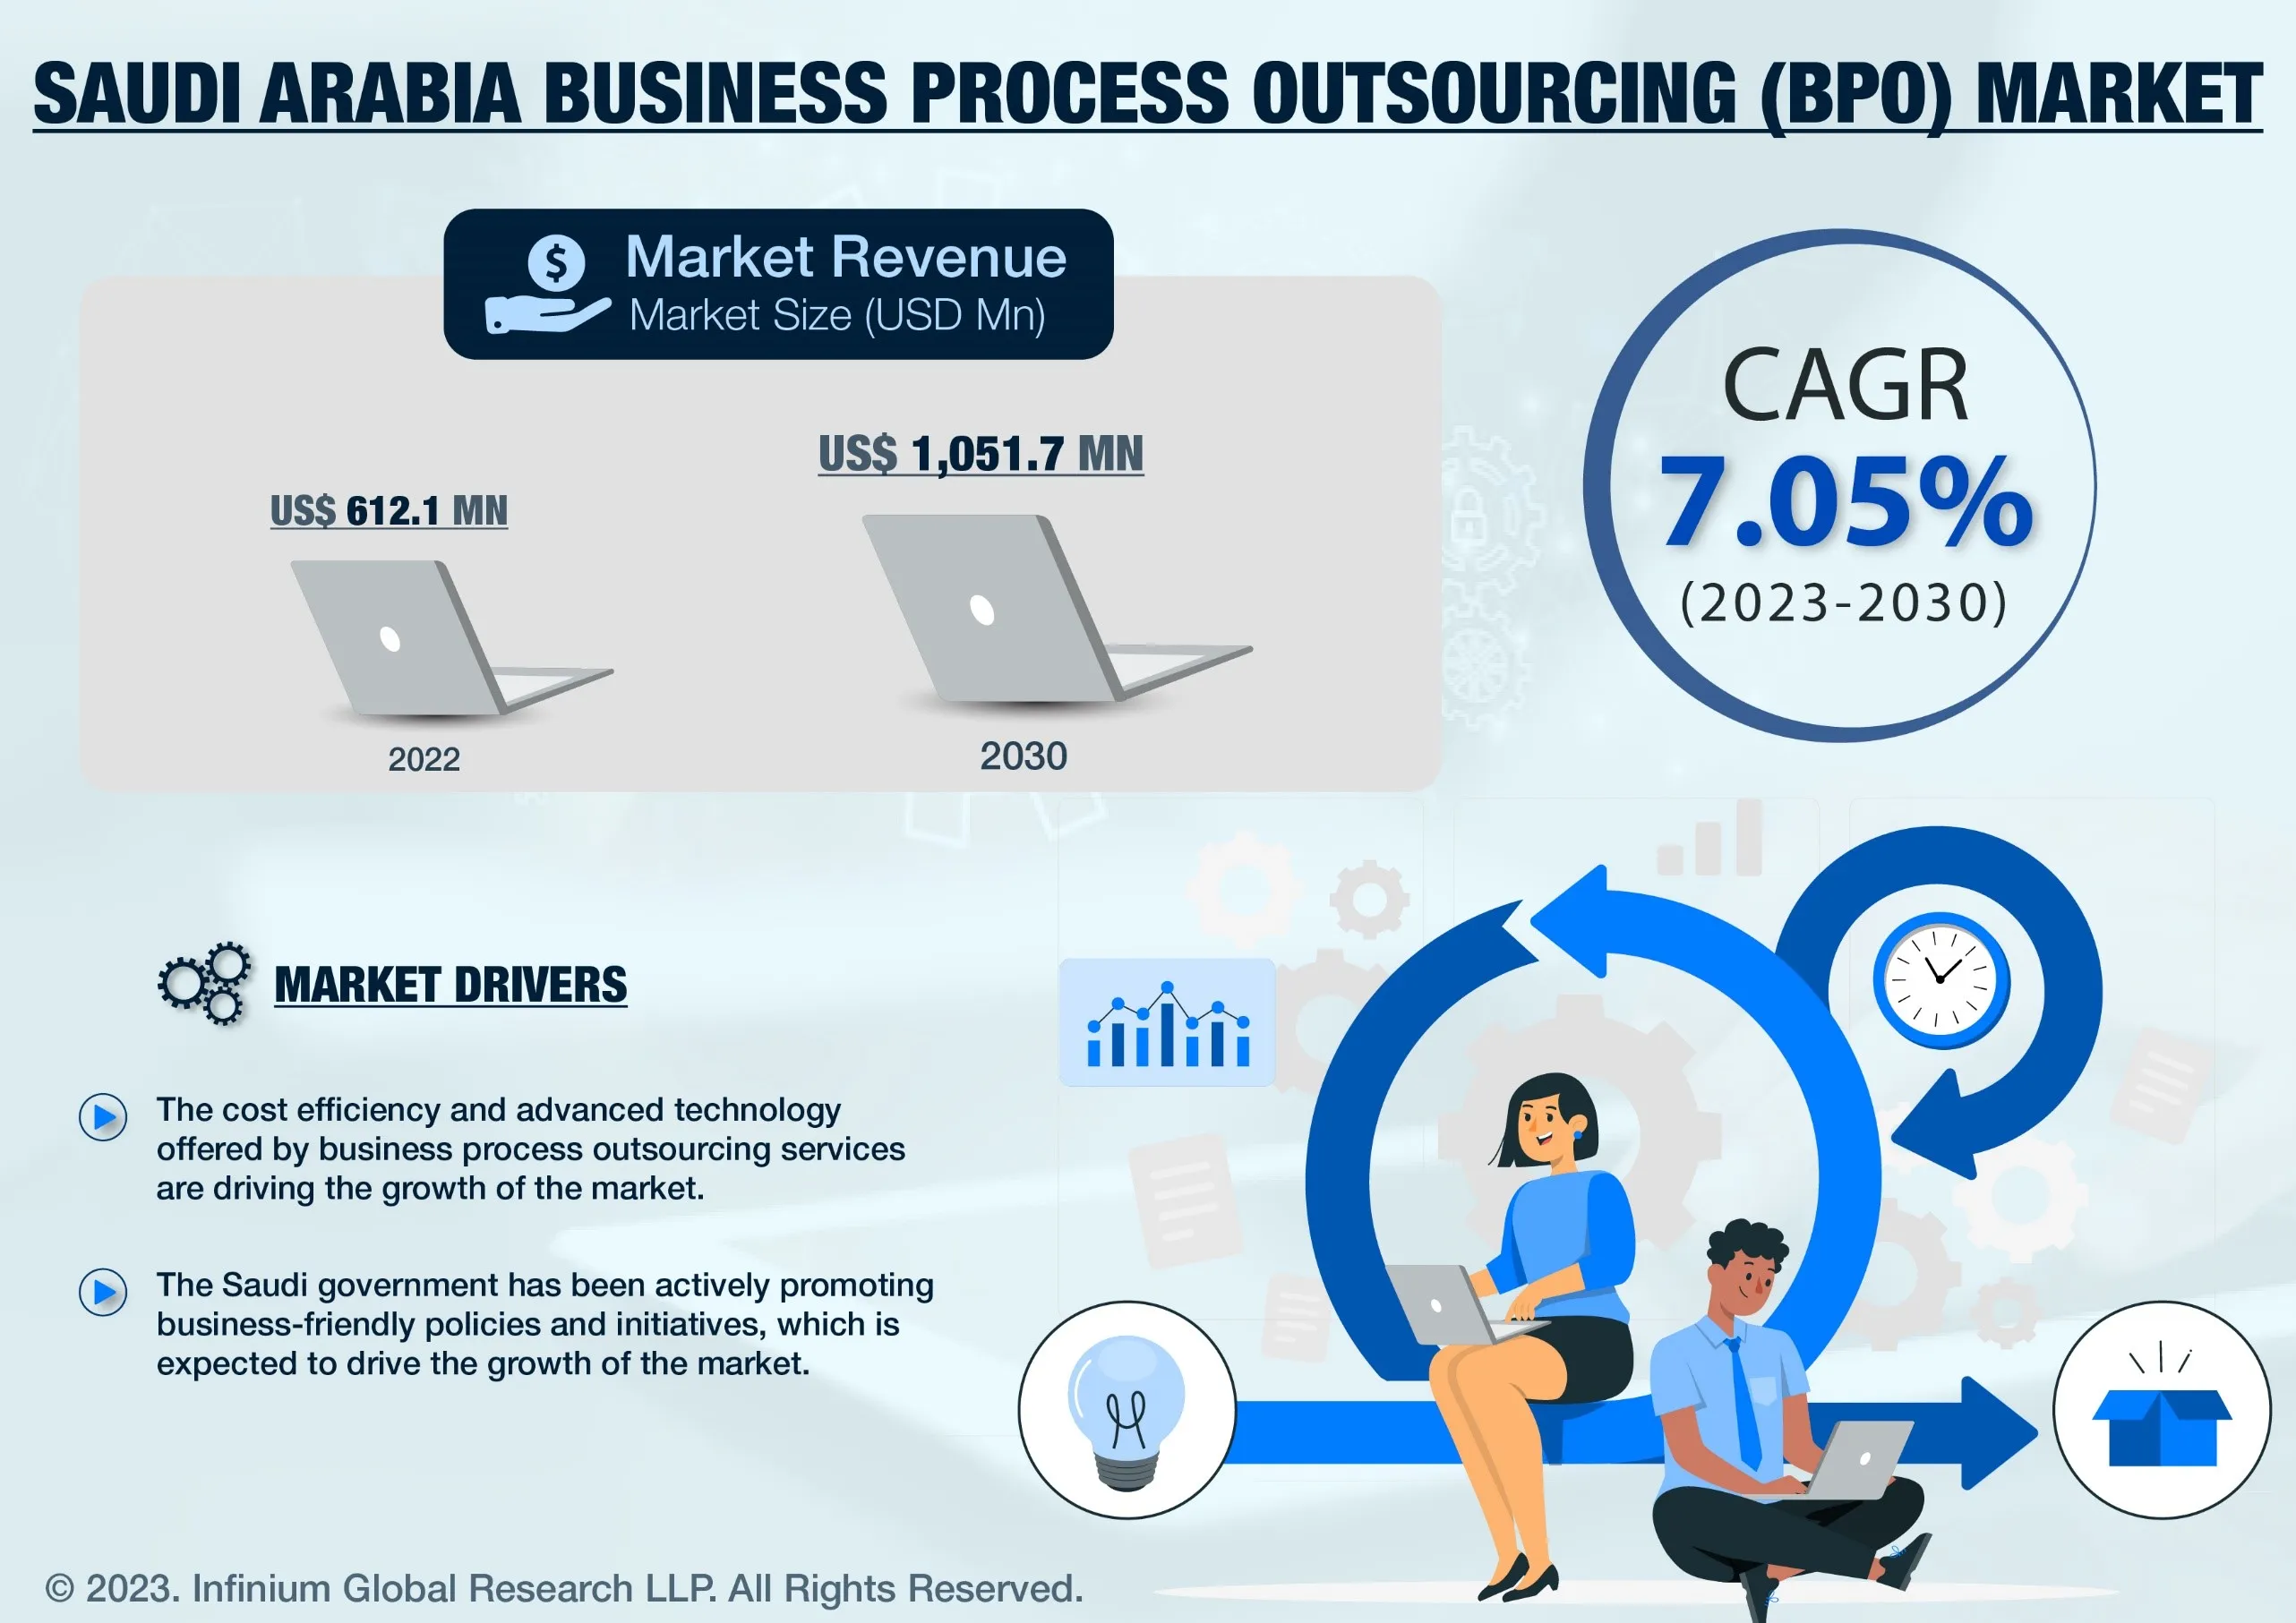 Saudi Arabia Business Process Outsourcing (BPO) Market was Valued at USD 612.1 Million in 2022 and is Expected to Reach USD 1,051.7 Million by 2030 and Grow at a CAGR of 7.05% Over the Forecast Period.